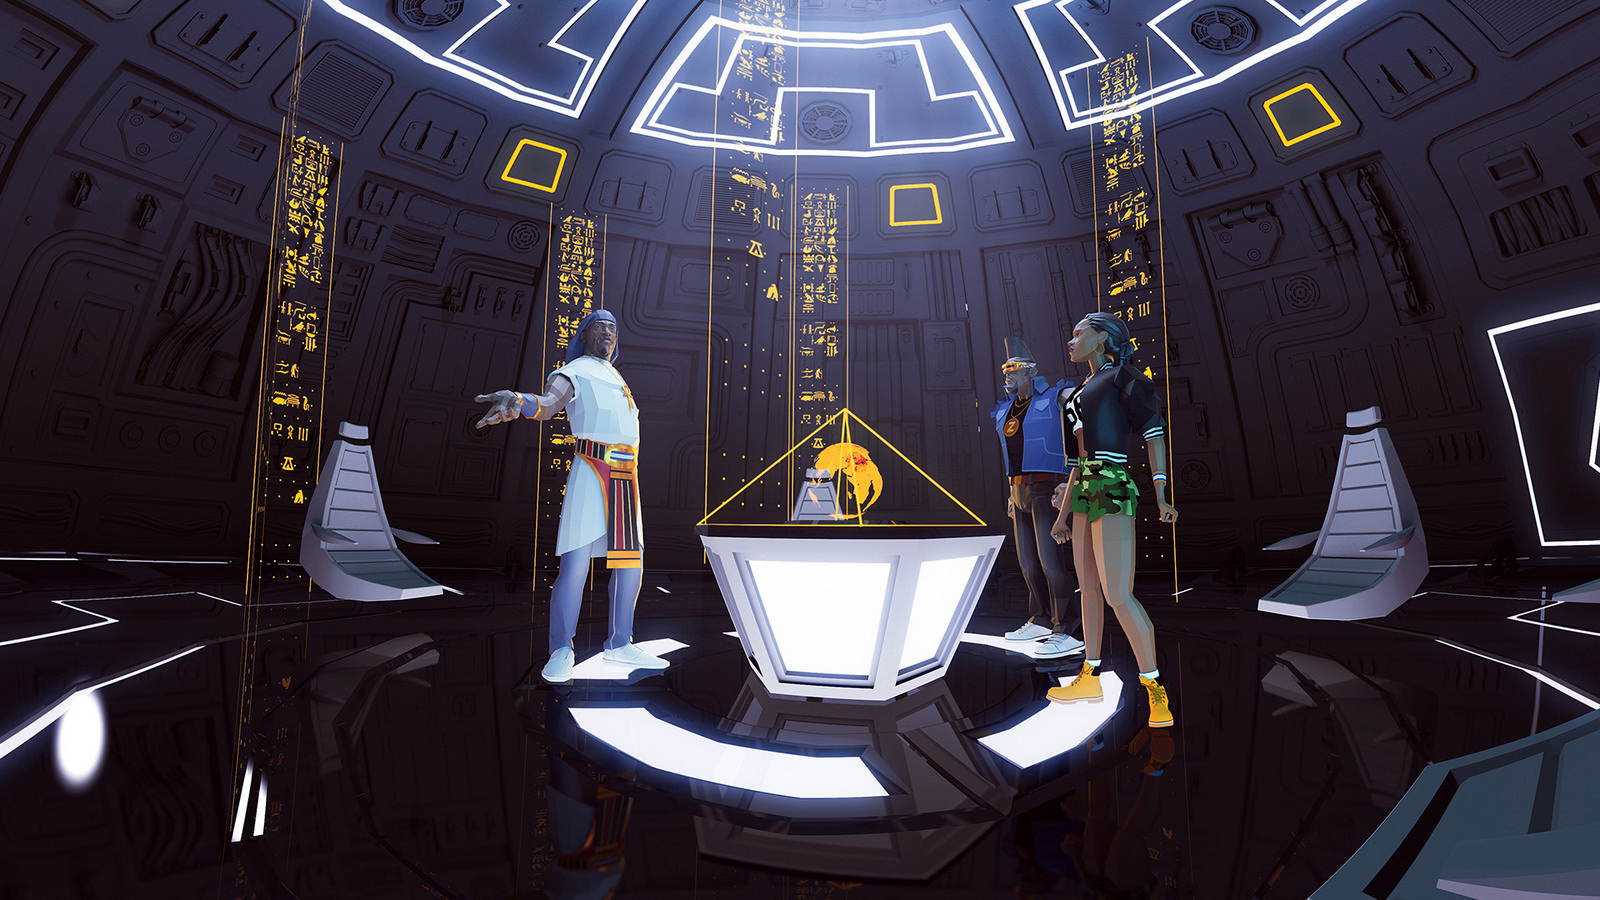 A still image from Masters Of The Sun by will.i.am, apl de ap, and Taboo, an official selection of the New Frontier VR Experiences program at the 2018 Sundance Film Festival. Courtesy of Sundance Institute.